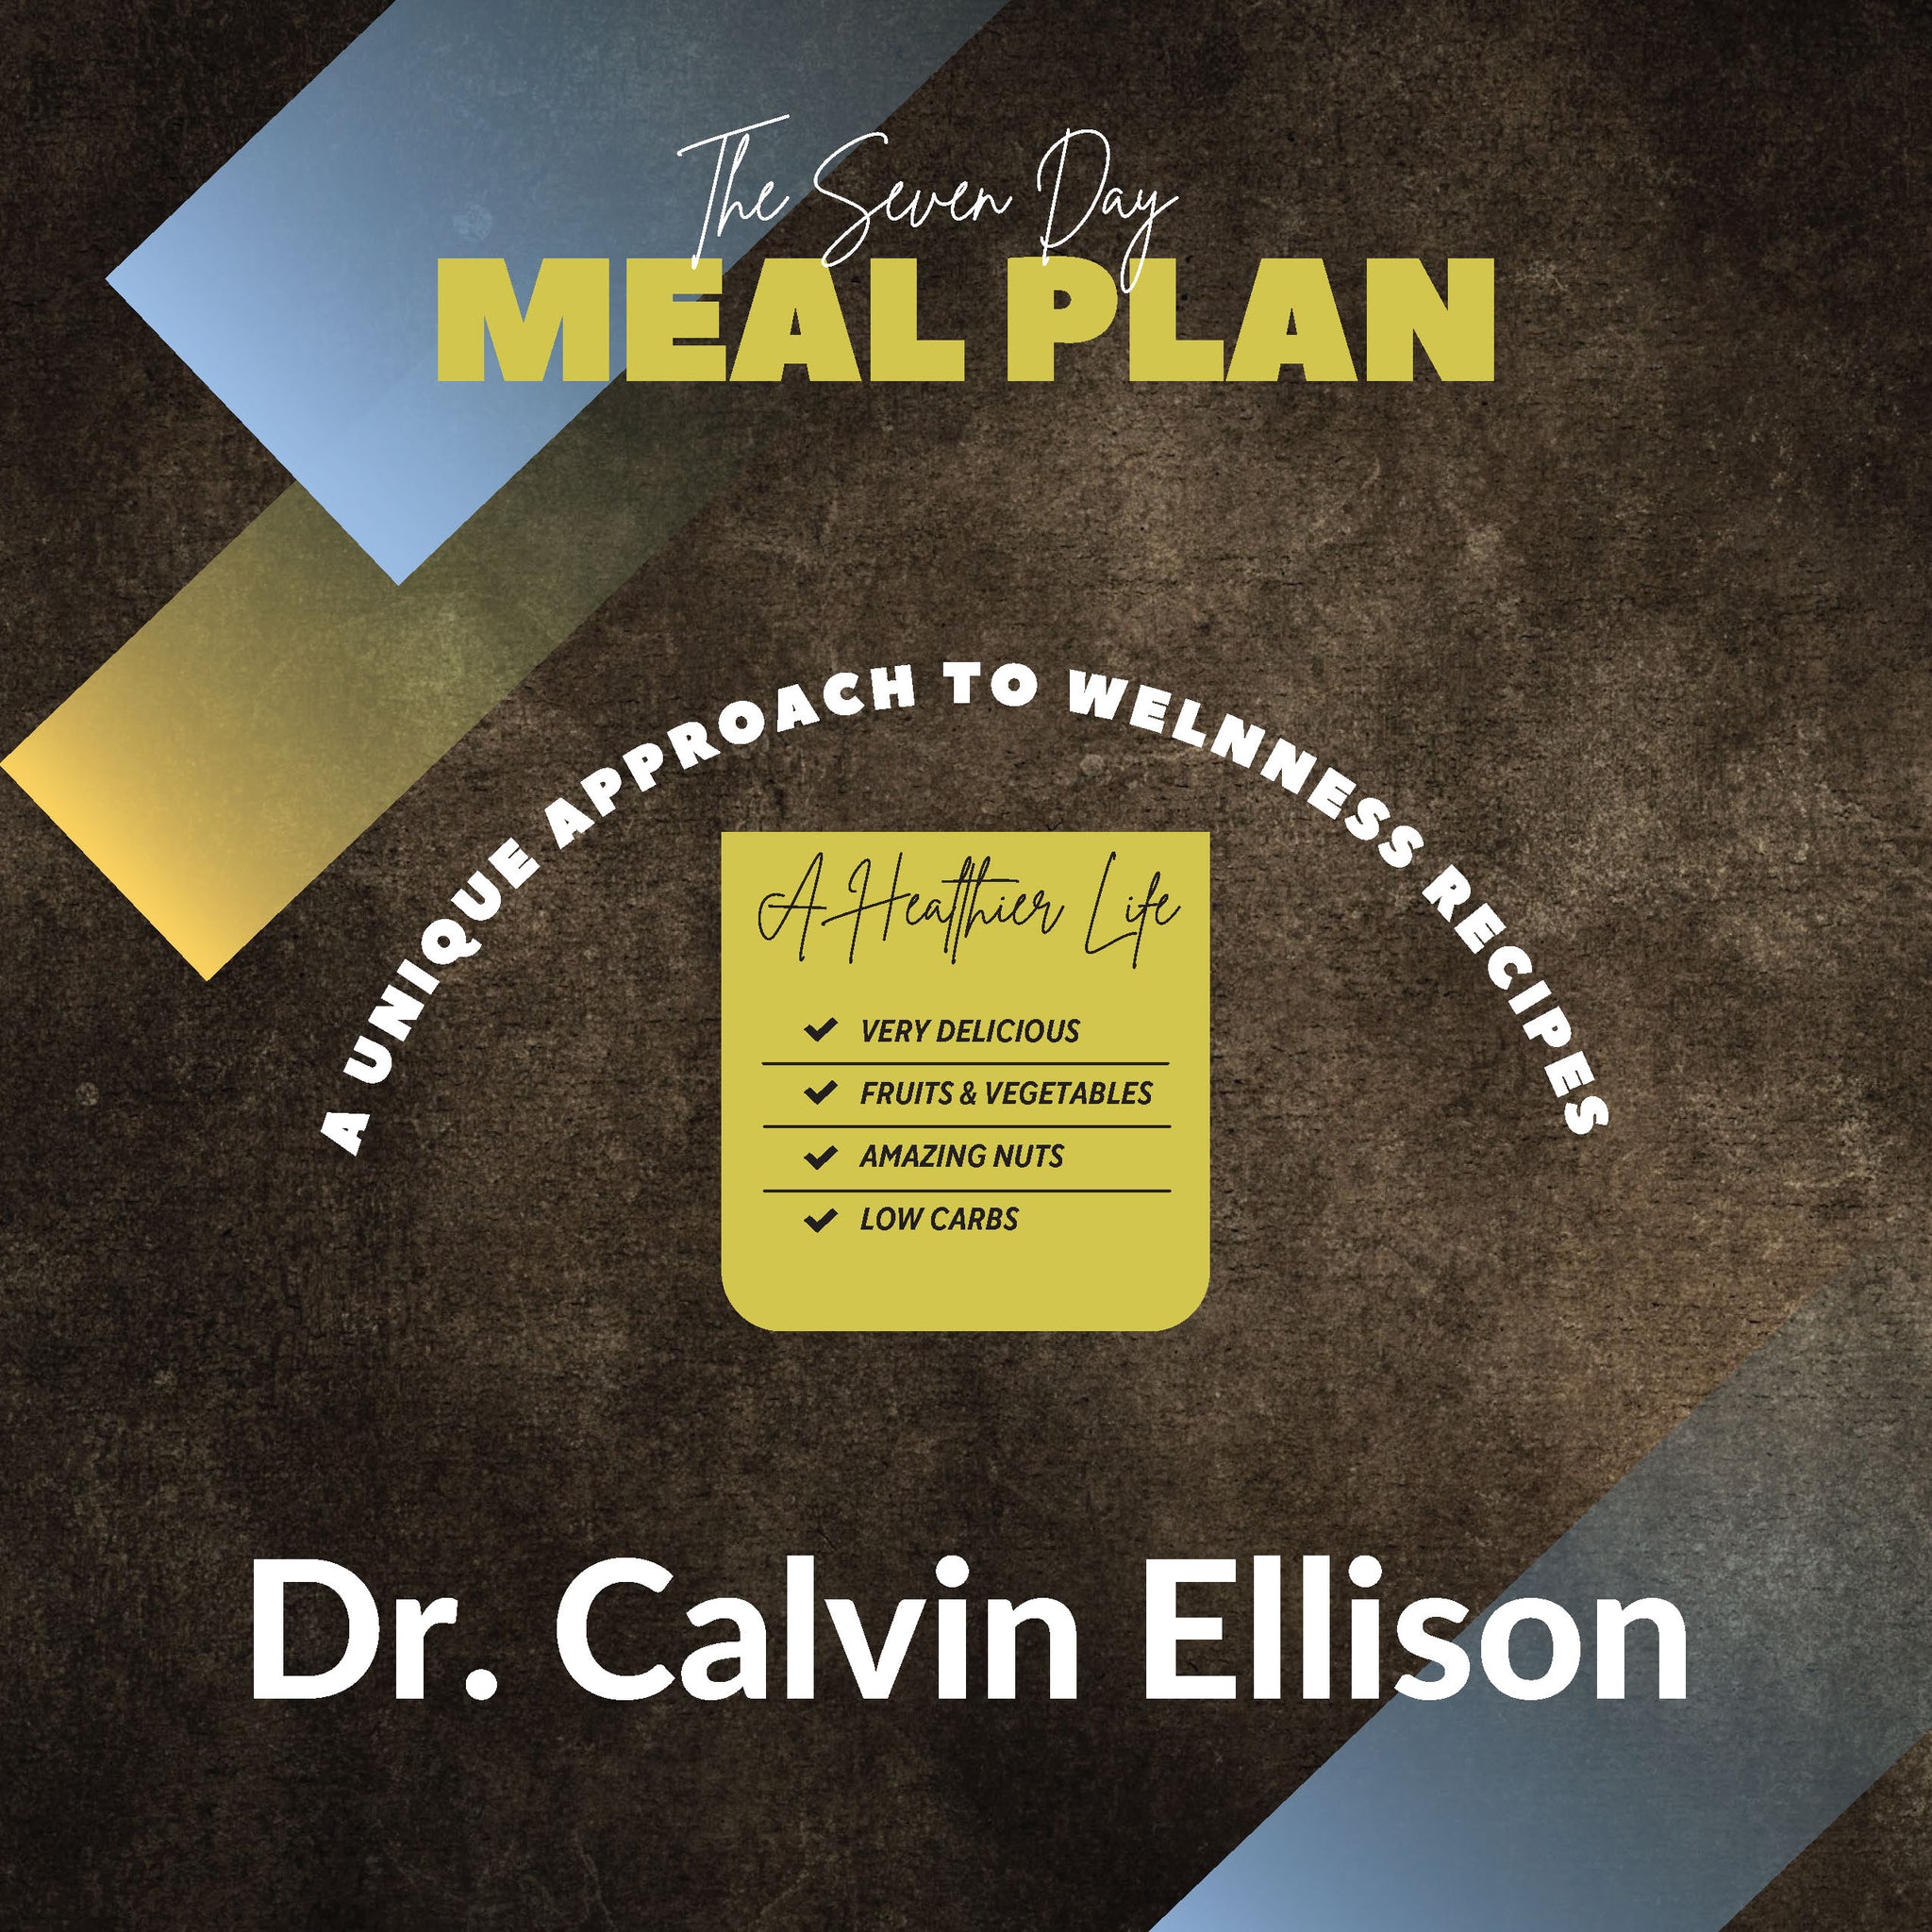 The Seven Day Meal Plan : A meal plan refers to any strategy used to map out what you or somebody else is going to eat on a particular day, week, or month.